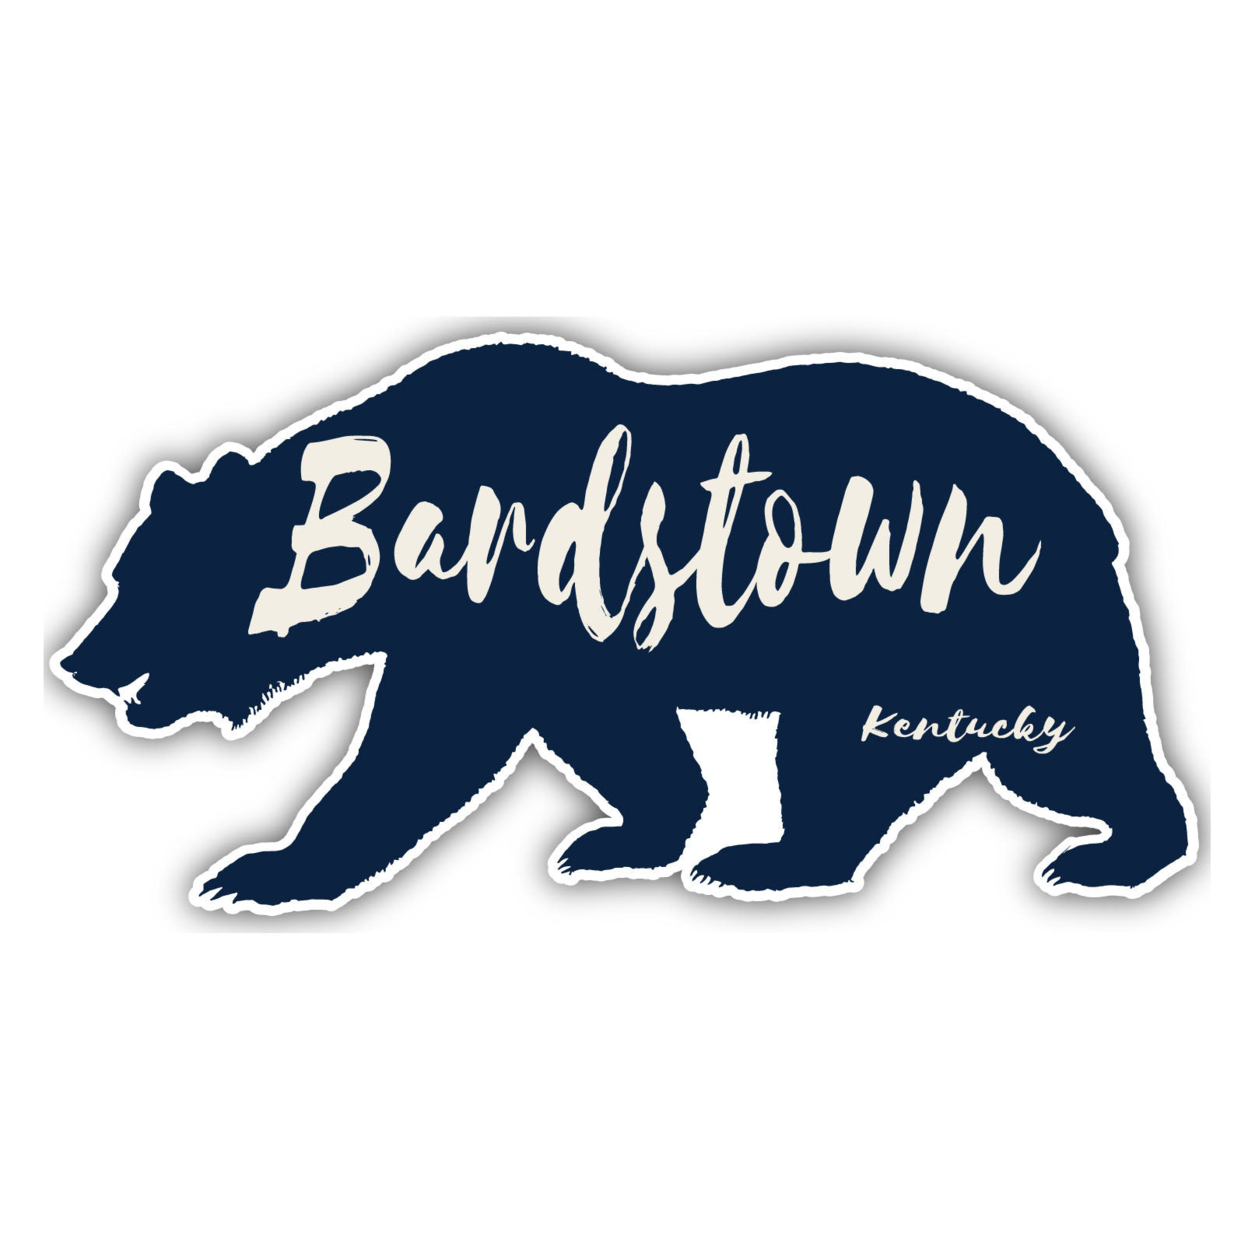 Bardstown Kentucky Souvenir Decorative Stickers (Choose Theme And Size) - Single Unit, 8-Inch, Great Outdoors